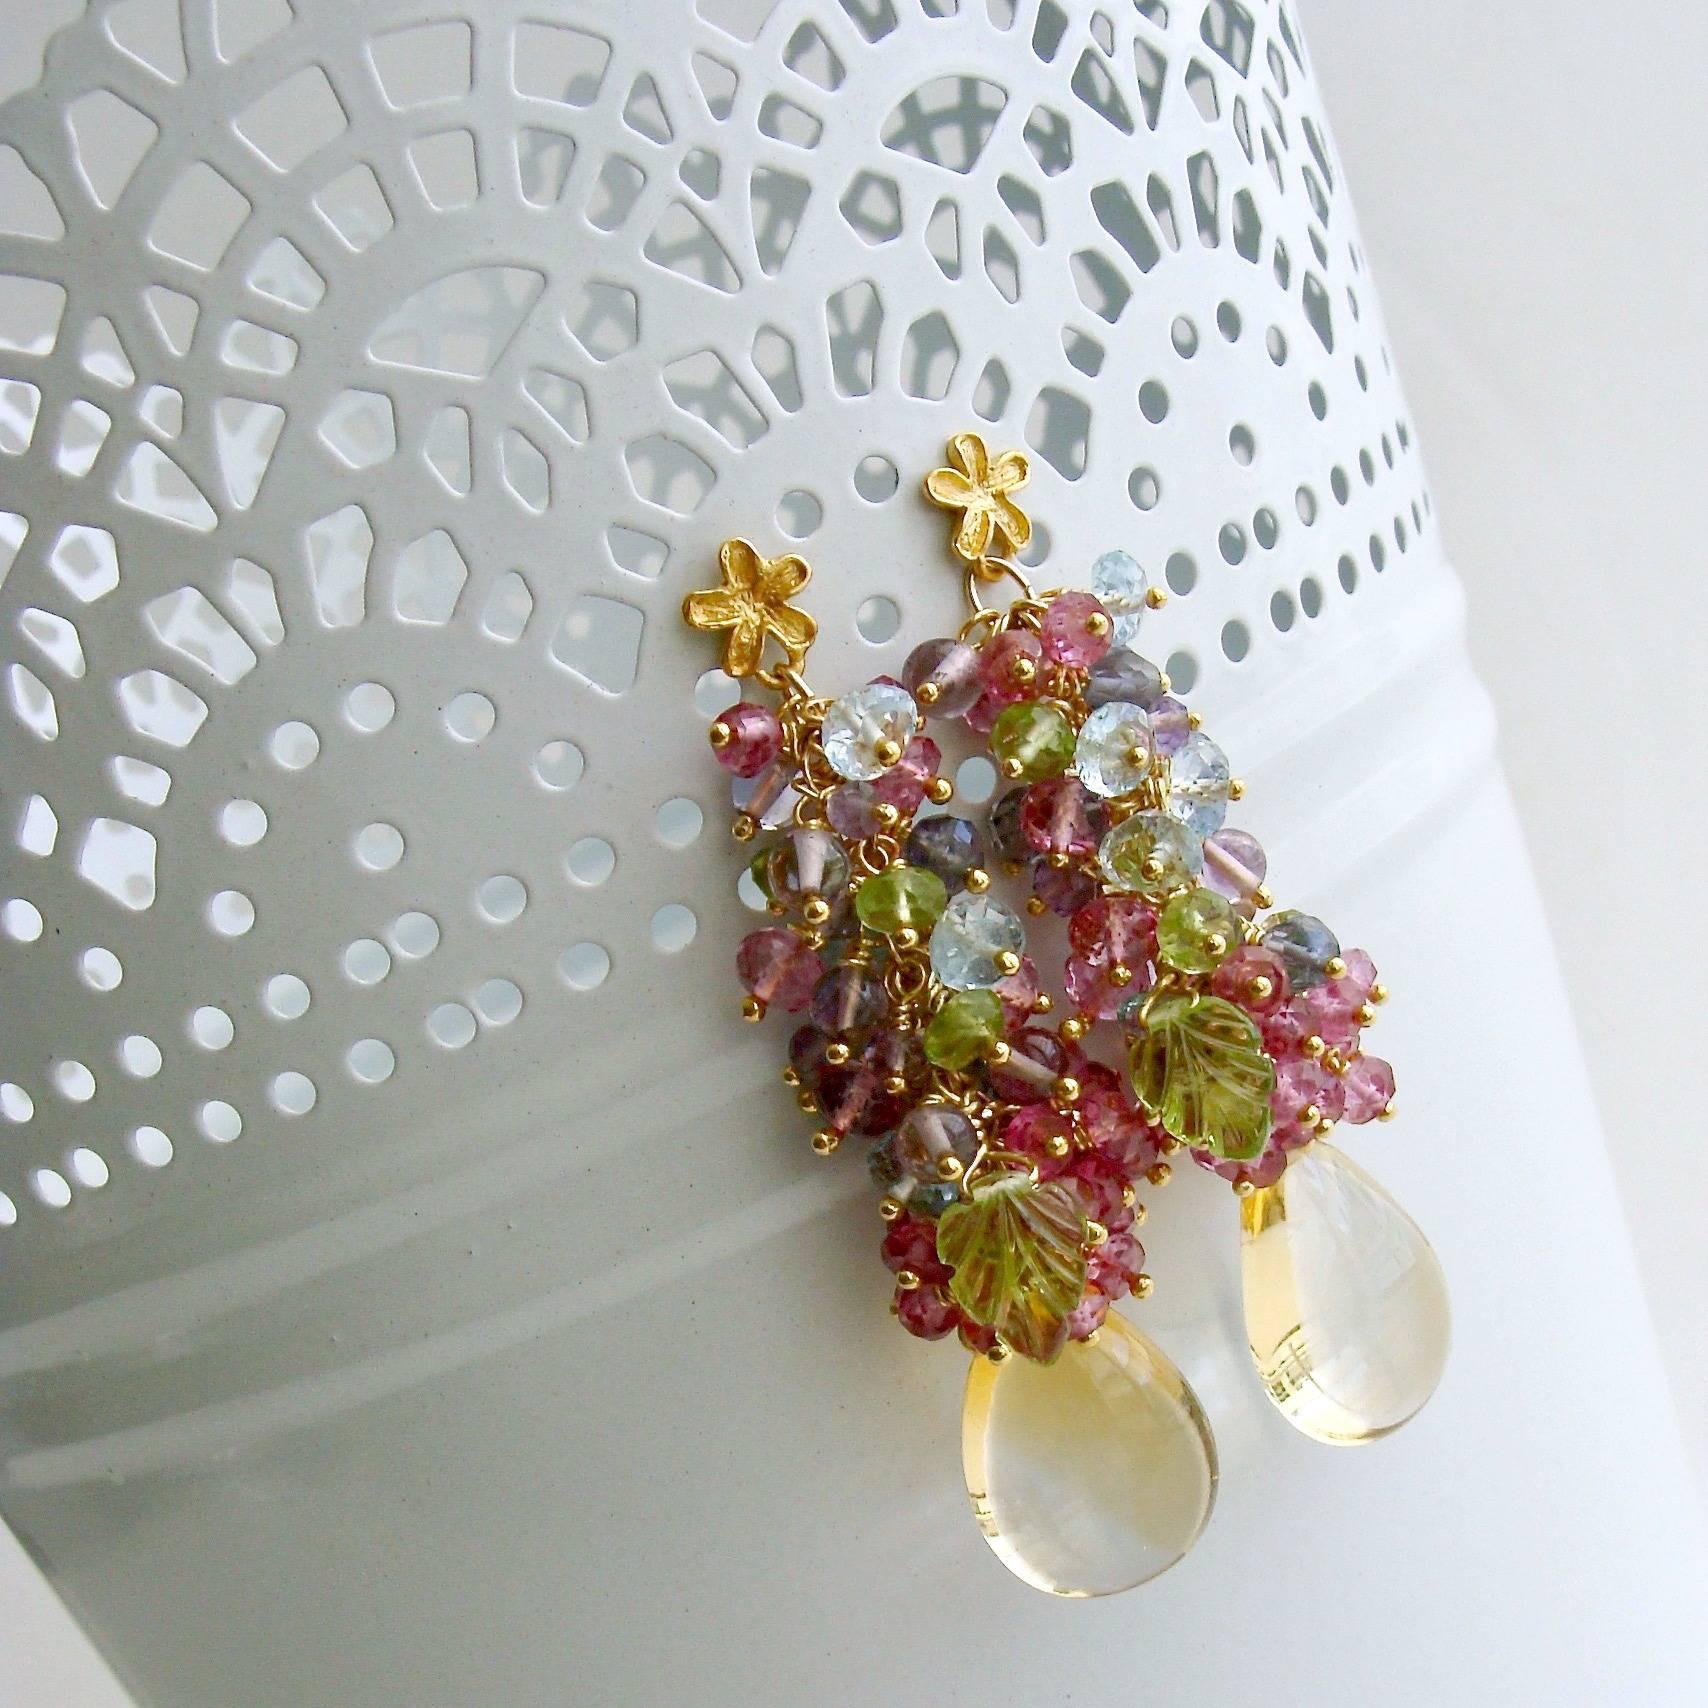 Fleur II Earrings.

After a harsh and cold winter, everyone is ready for the happy colors of spring and these stunning cluster drop earrings don’t disappoint.  A cacophony of spring colors mimics the beautiful colors of a spring garden for a